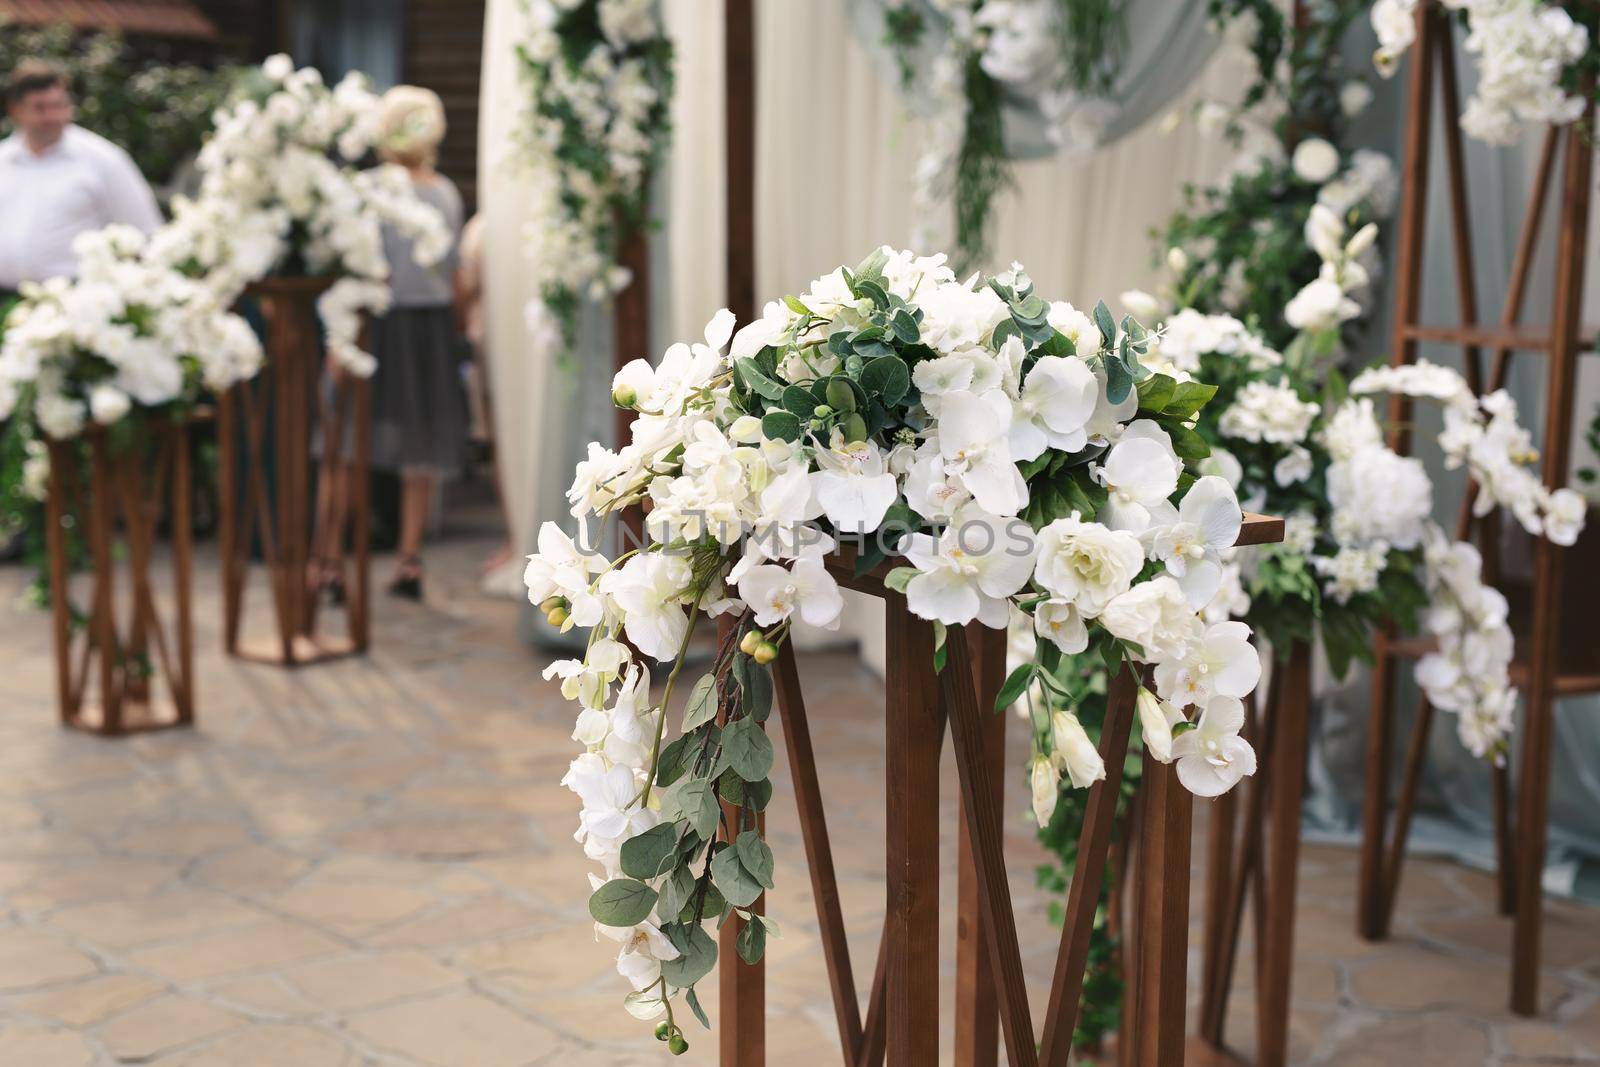 Details. Wedding ceremony in the open air of fresh flowers, with candles. Gentle and beautiful wedding decor for newlyweds by StudioPeace